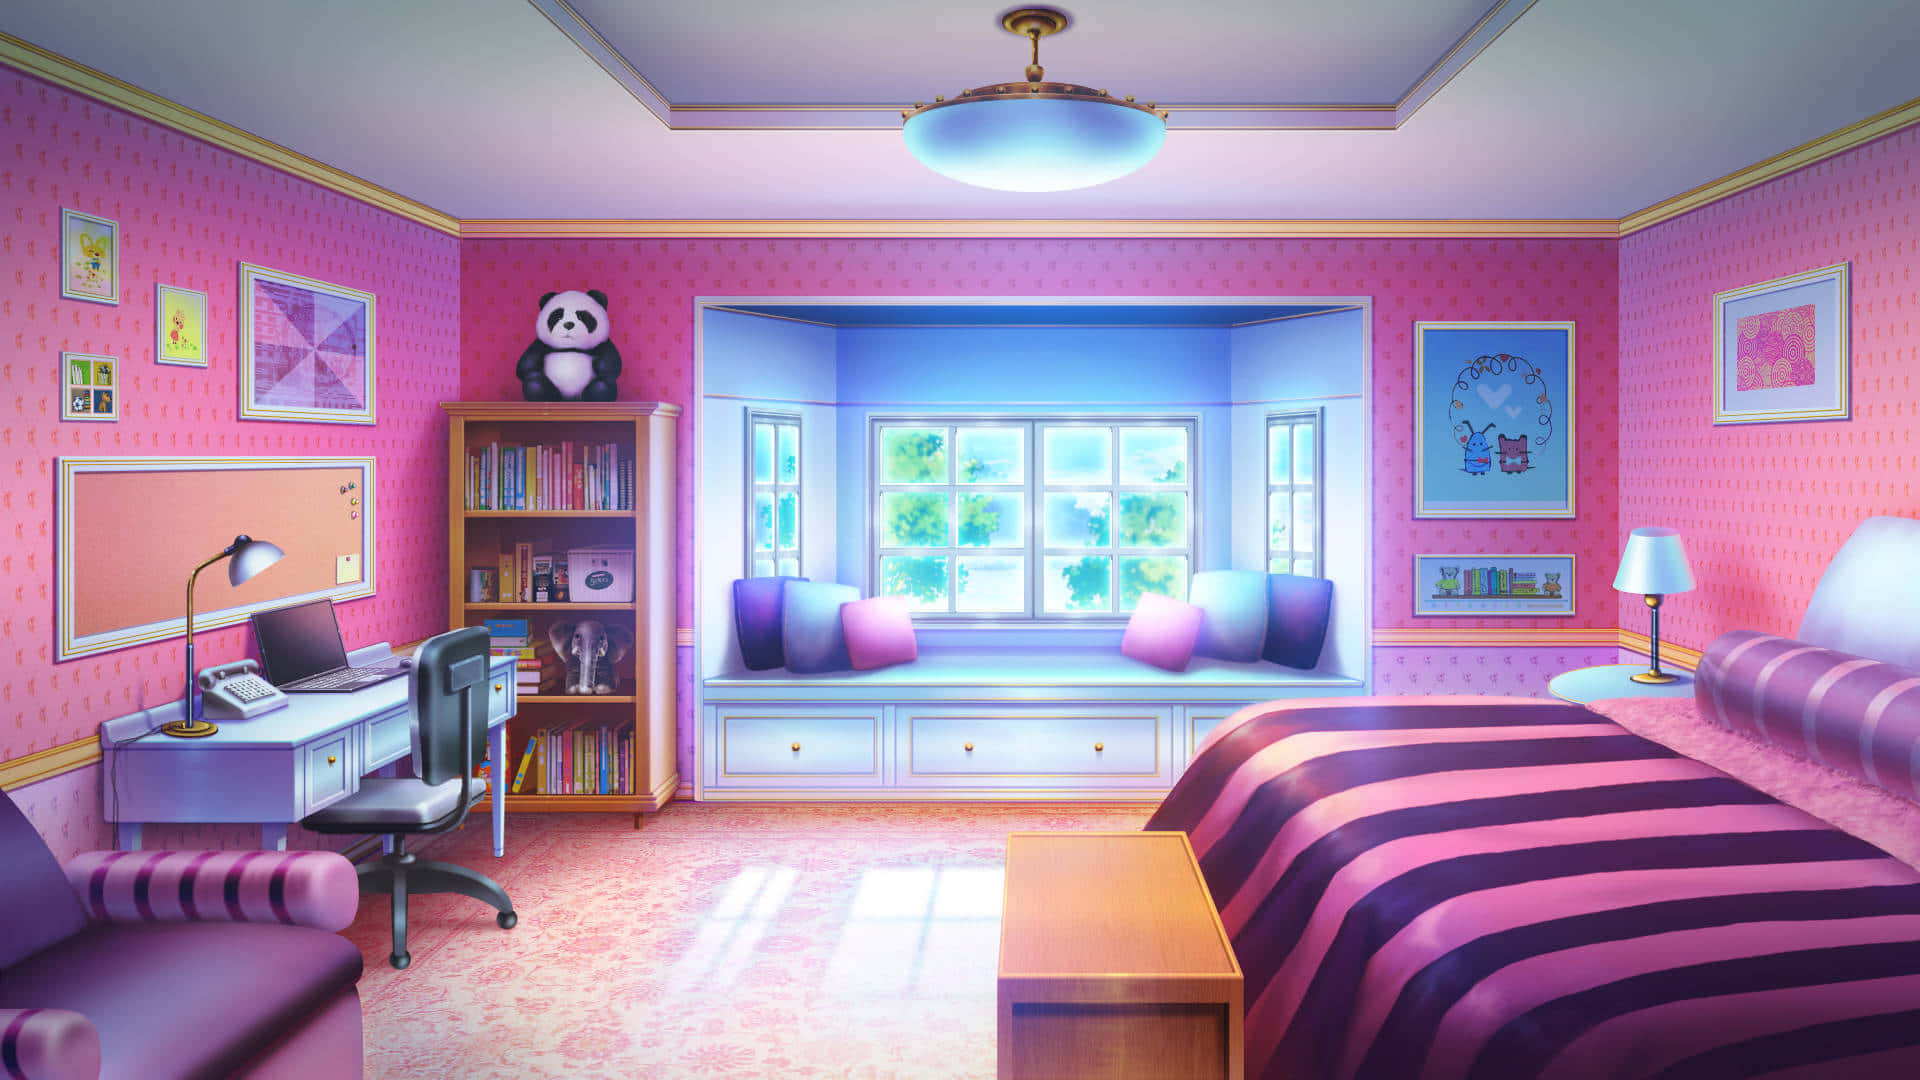 Download A Cute Anime Bedroom, Full of Colorful Personality ...